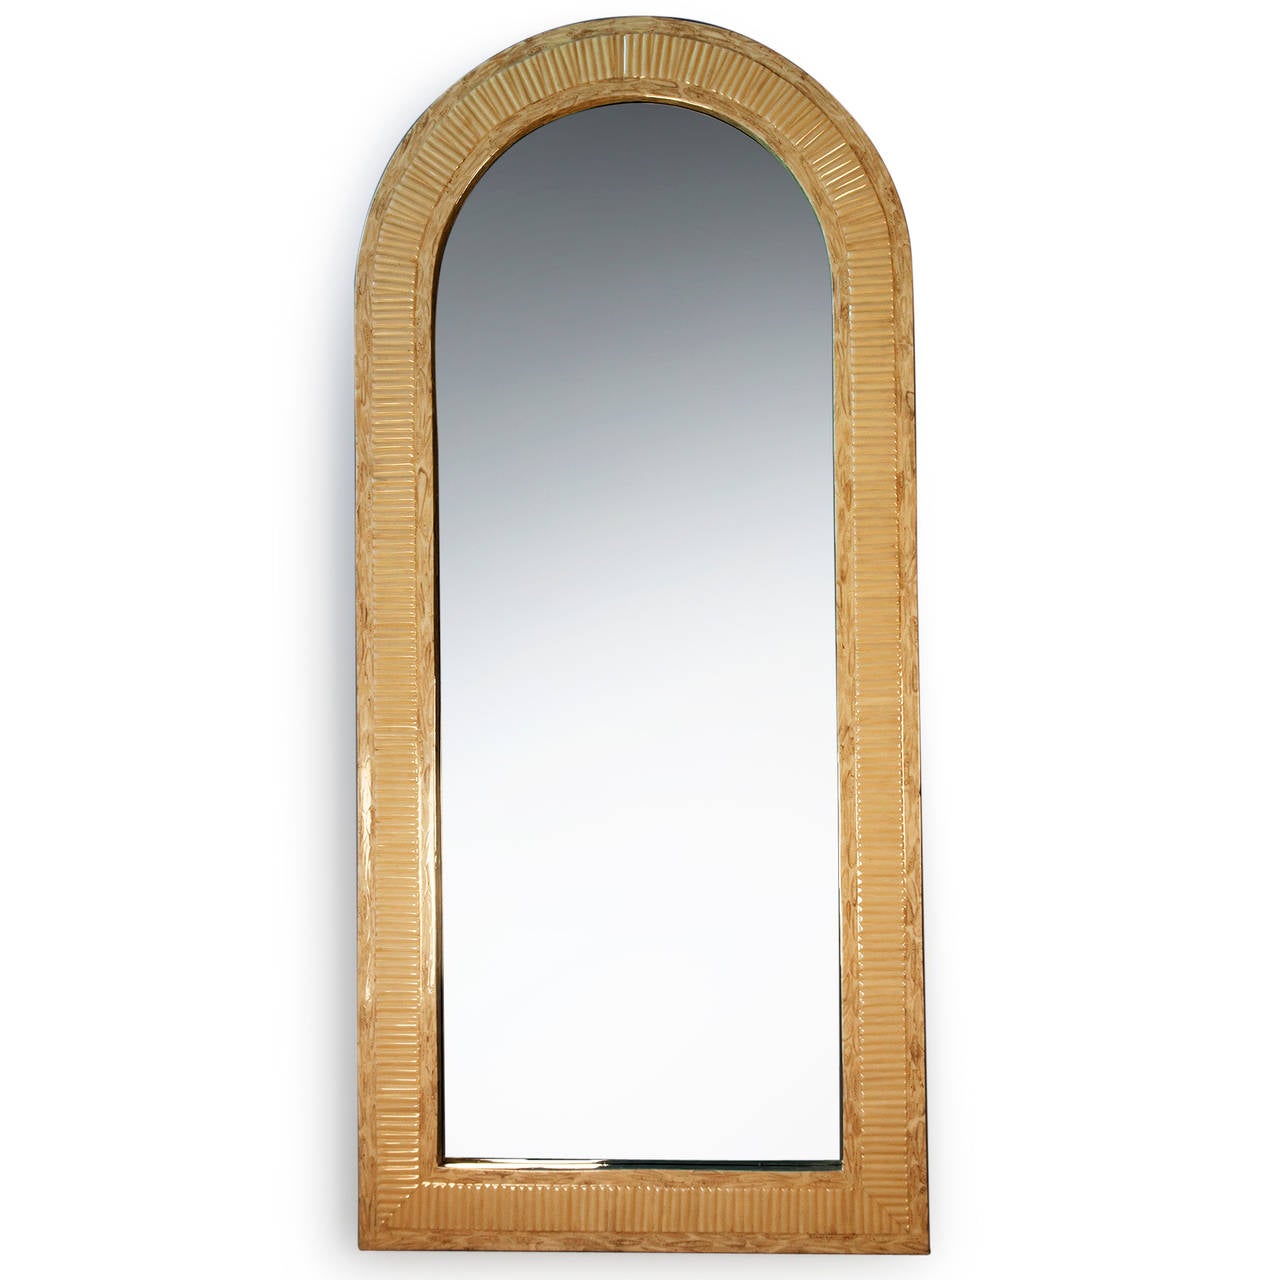 Rectangular arch top bone color lacquered mirror, the frame with ripple texturing, by Enrique Garcel, Columbian for the American market, circa 1980, in the style of Karl Springer, marked to backside. Measures: 66 1/2 in x 30 1/4 in, depth 1 1/2 in.